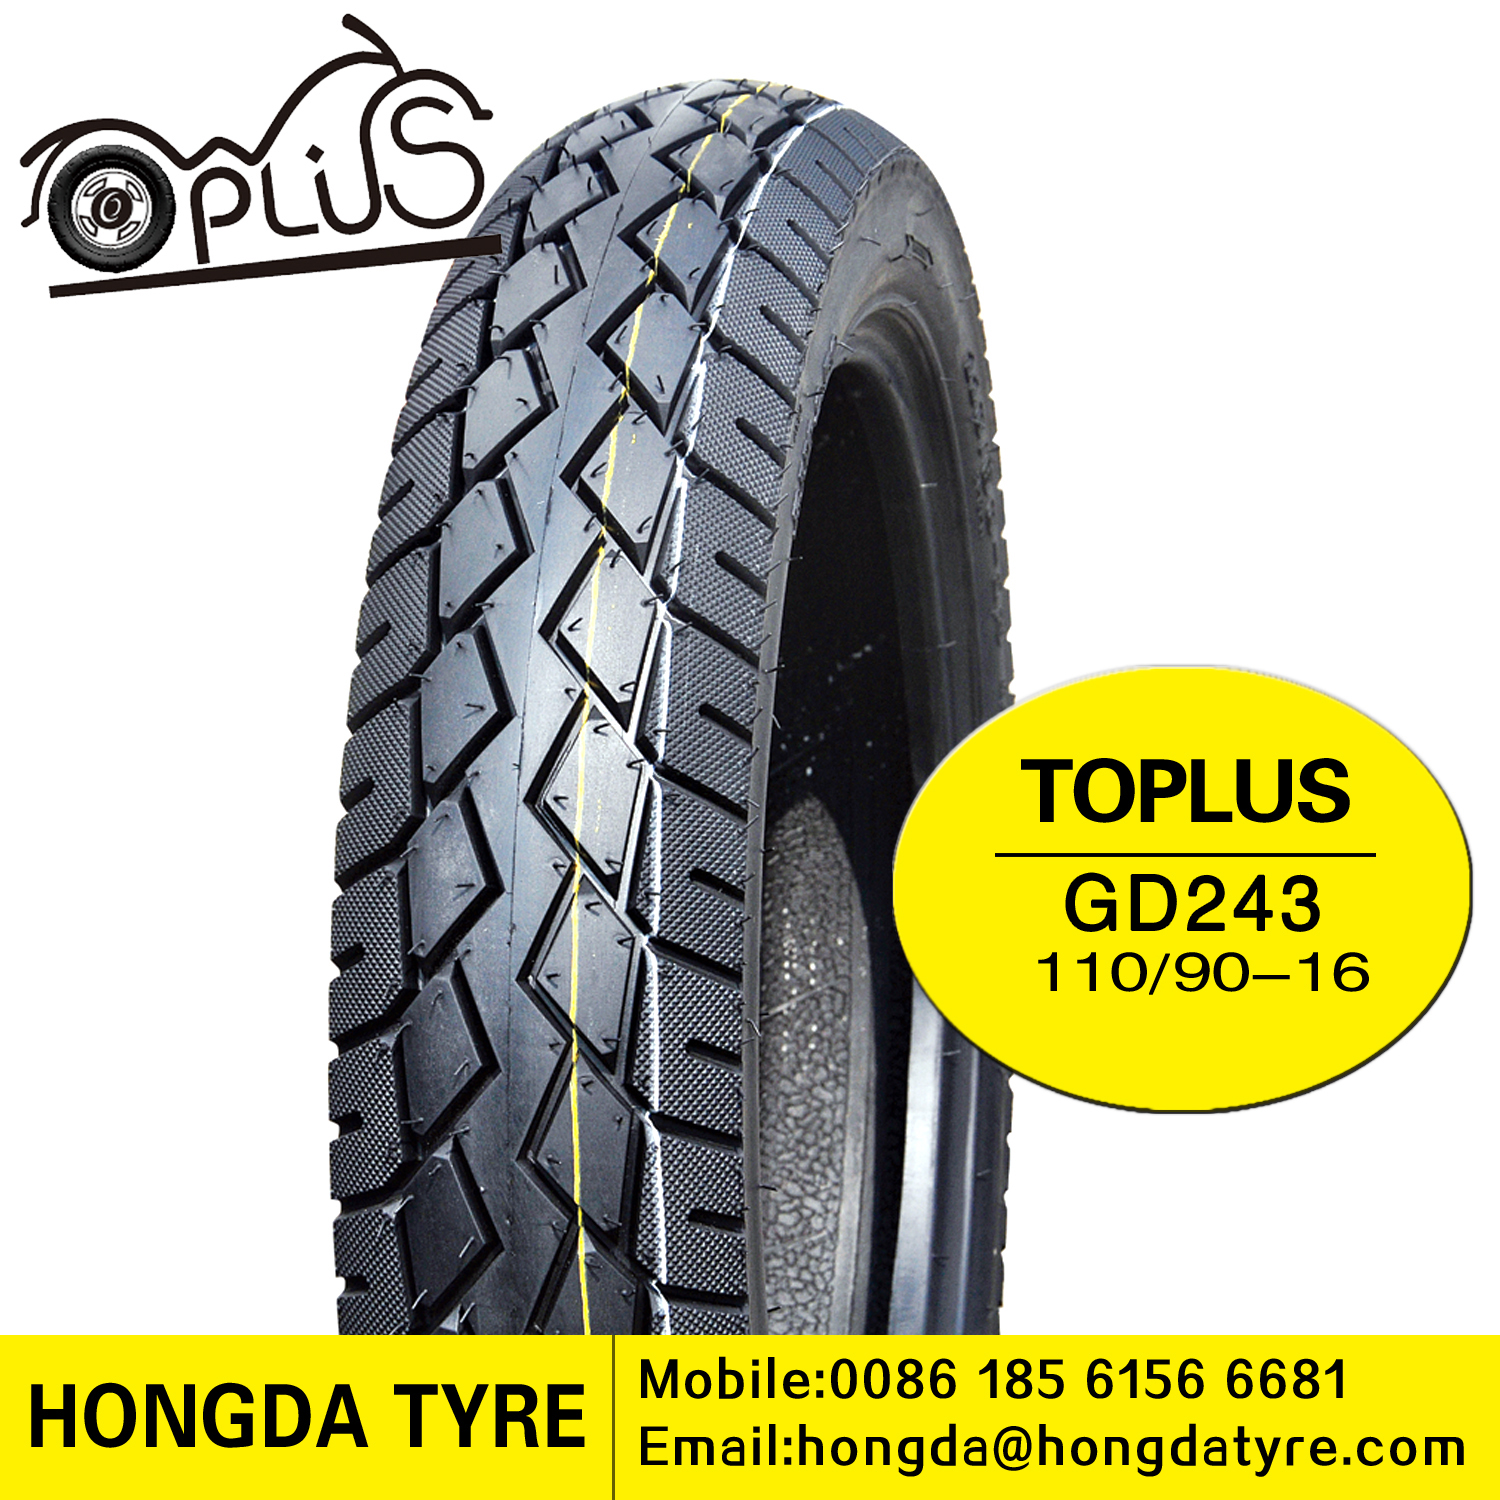 Motorcycle tyre GD243